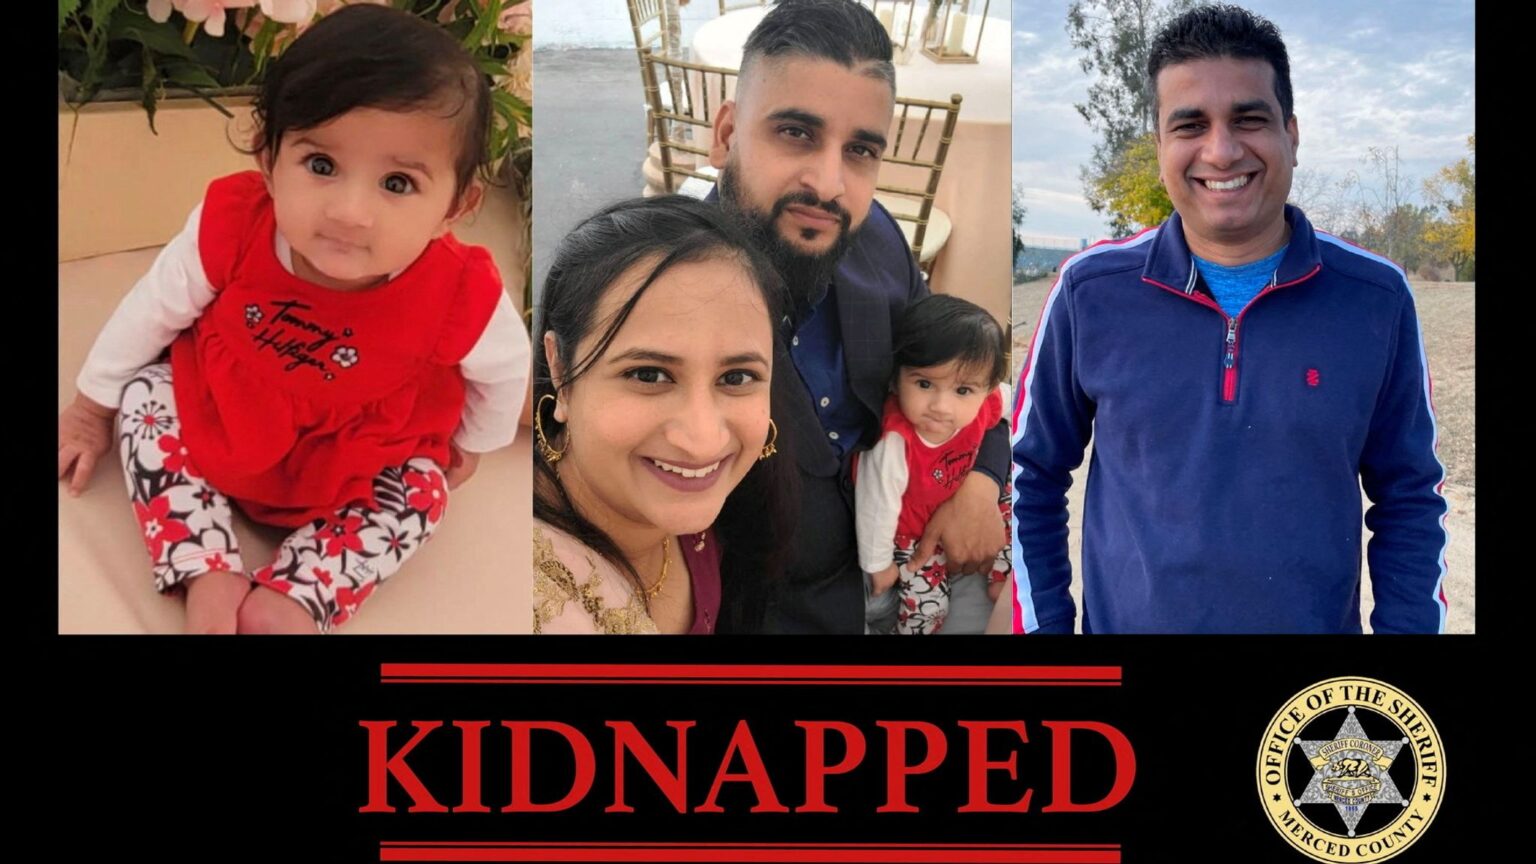 Bodies of family kidnapped at gunpoint in California found